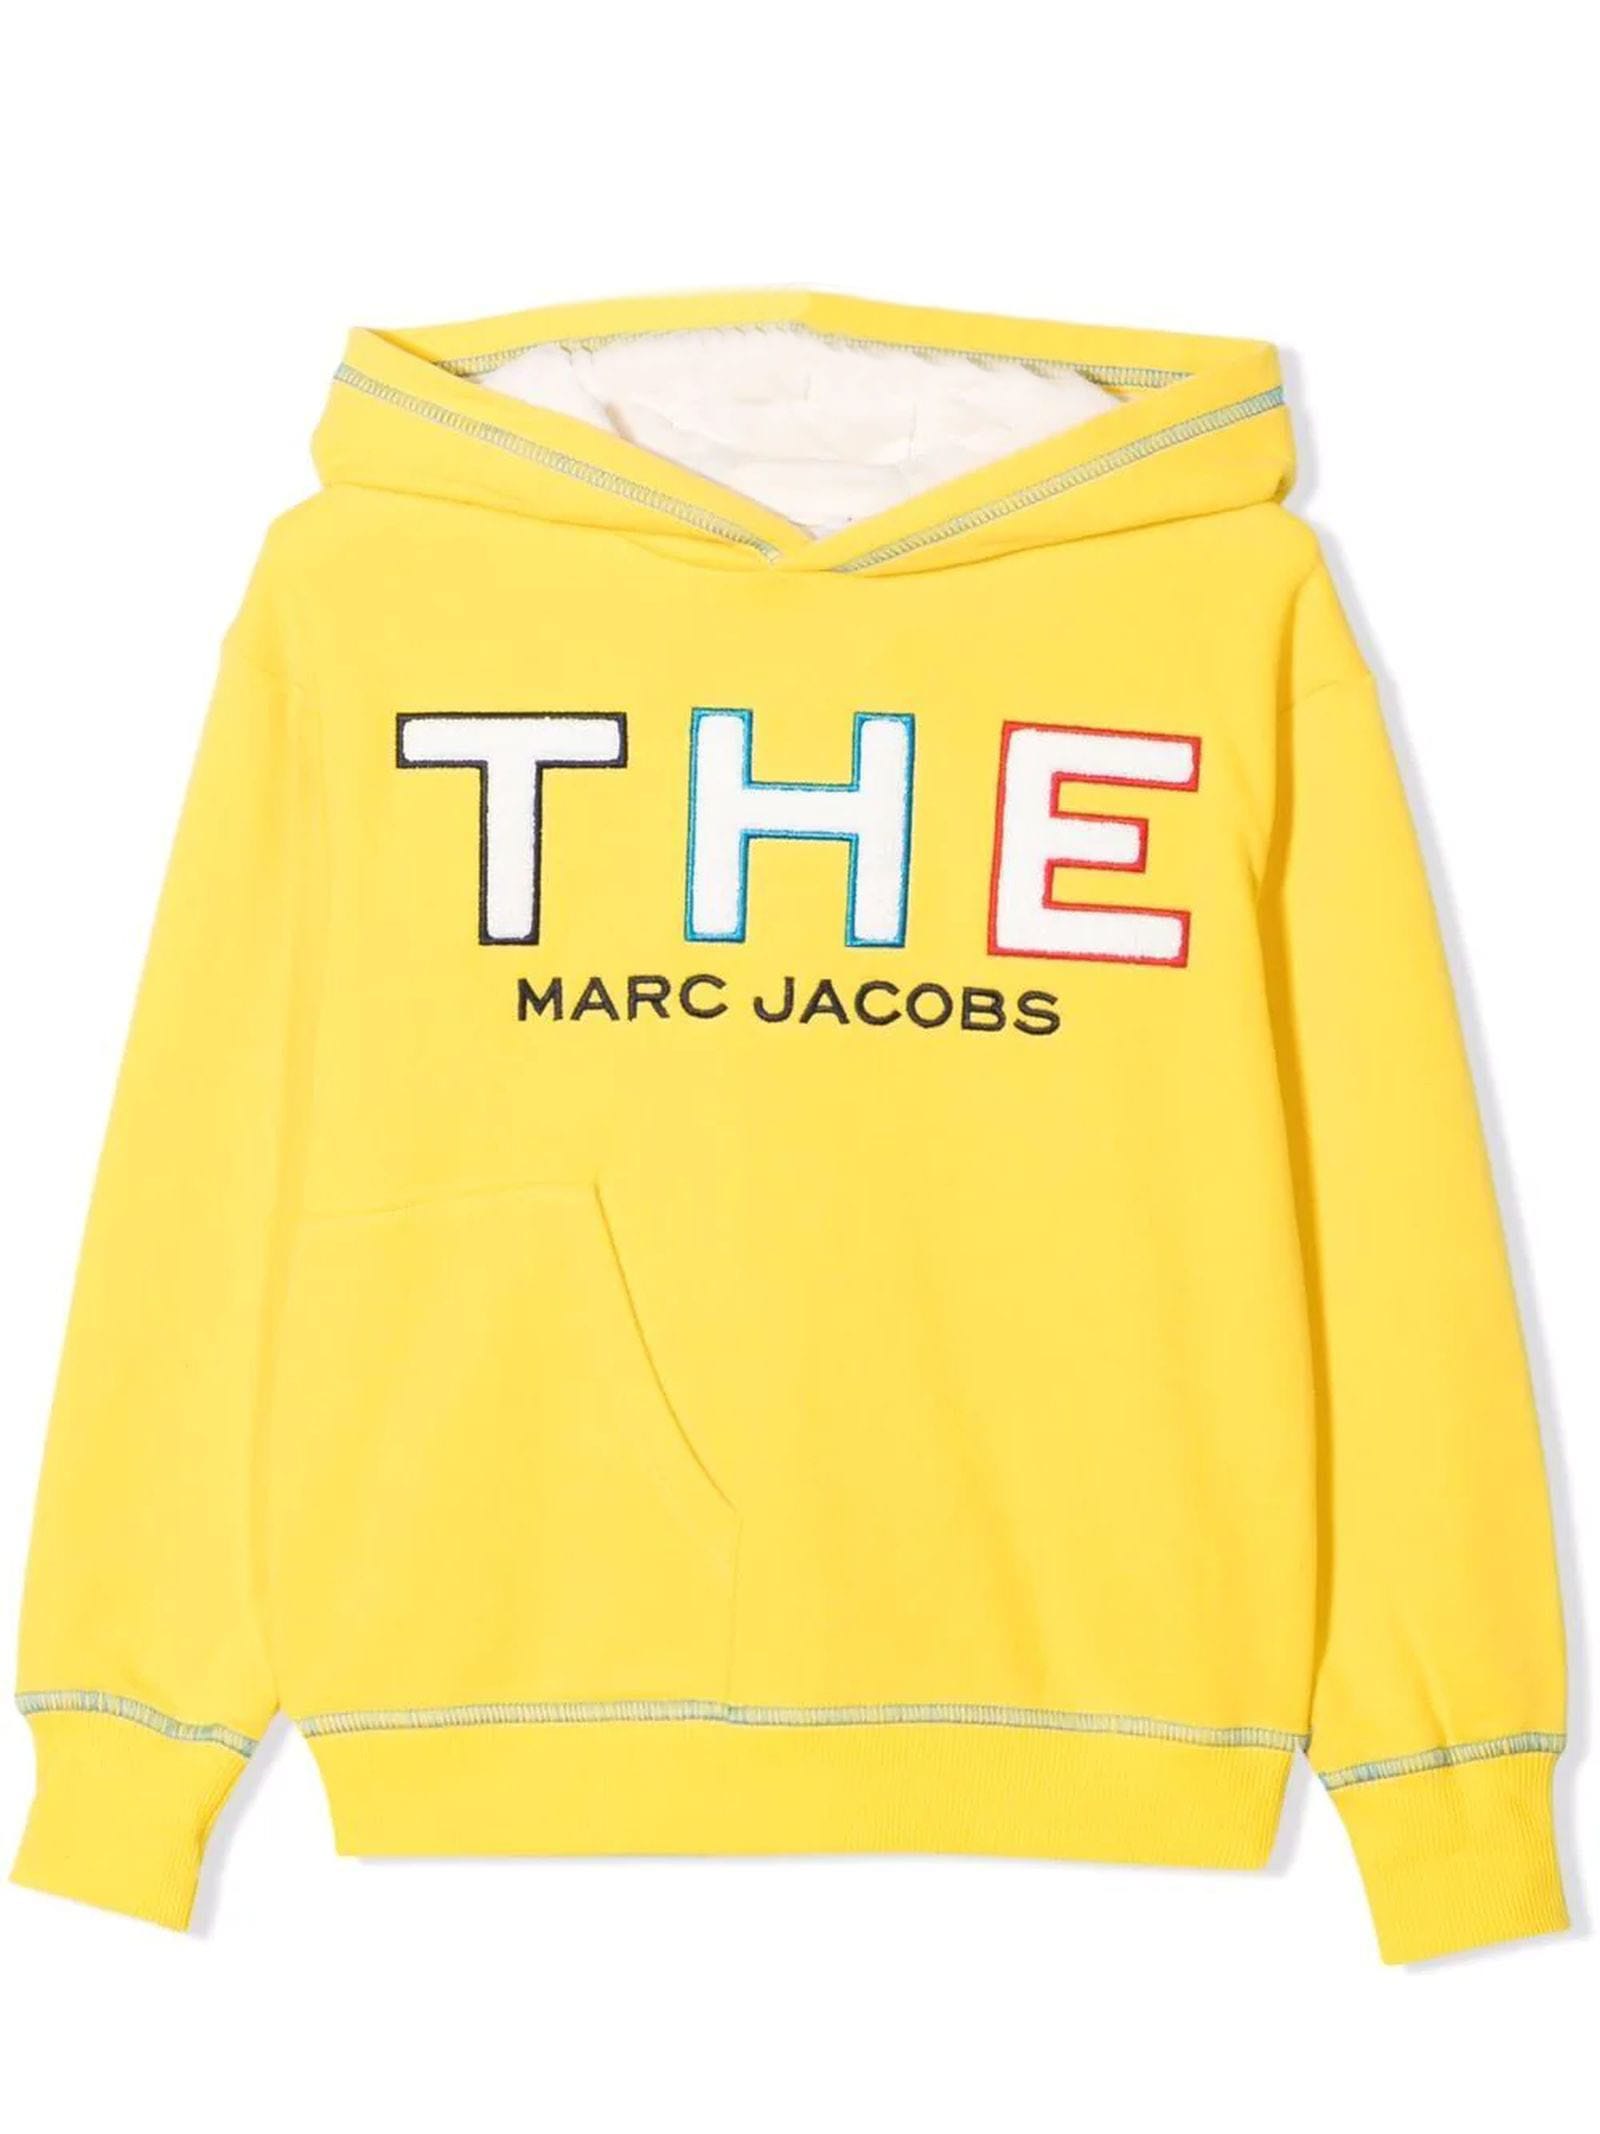 Marc Jacobs Yellow Cotton Hoodie